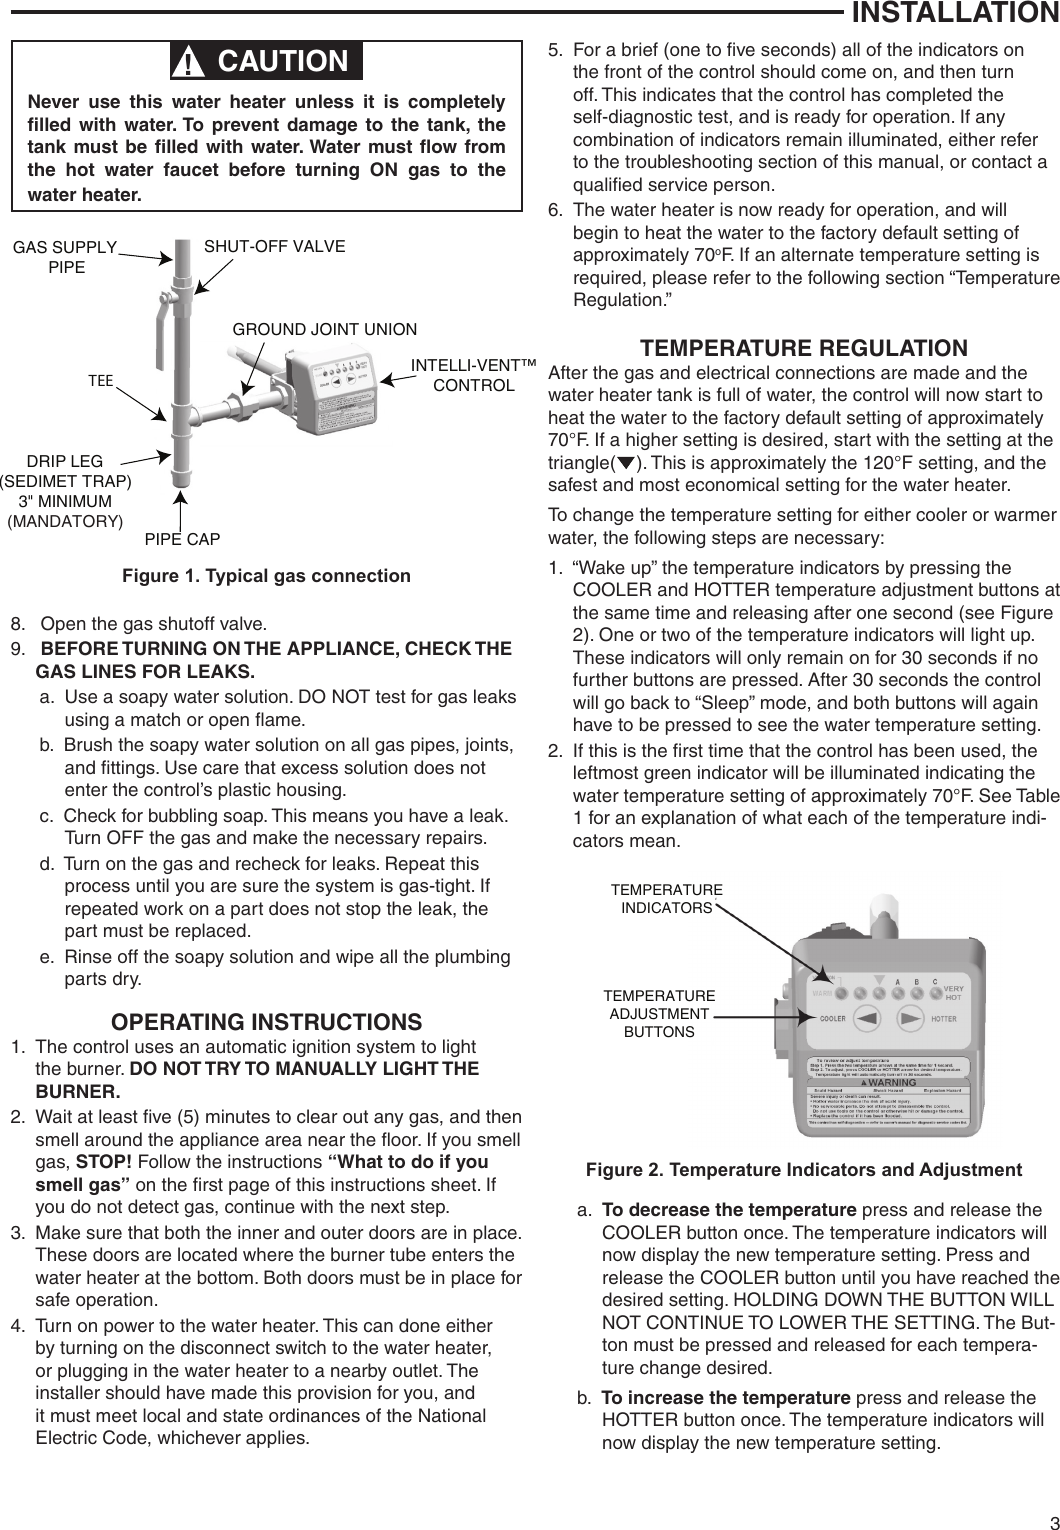 Page 3 of 8 - White-Rodgers White-Rodgers-37E73A-903-Intelli-Vent-Control-For-Power-Vented-Water-Heaters-Installation-Instructions- 37E73A-903_Intellivent_37-7109A  White-rodgers-37e73a-903-intelli-vent-control-for-power-vented-water-heaters-installation-instructions